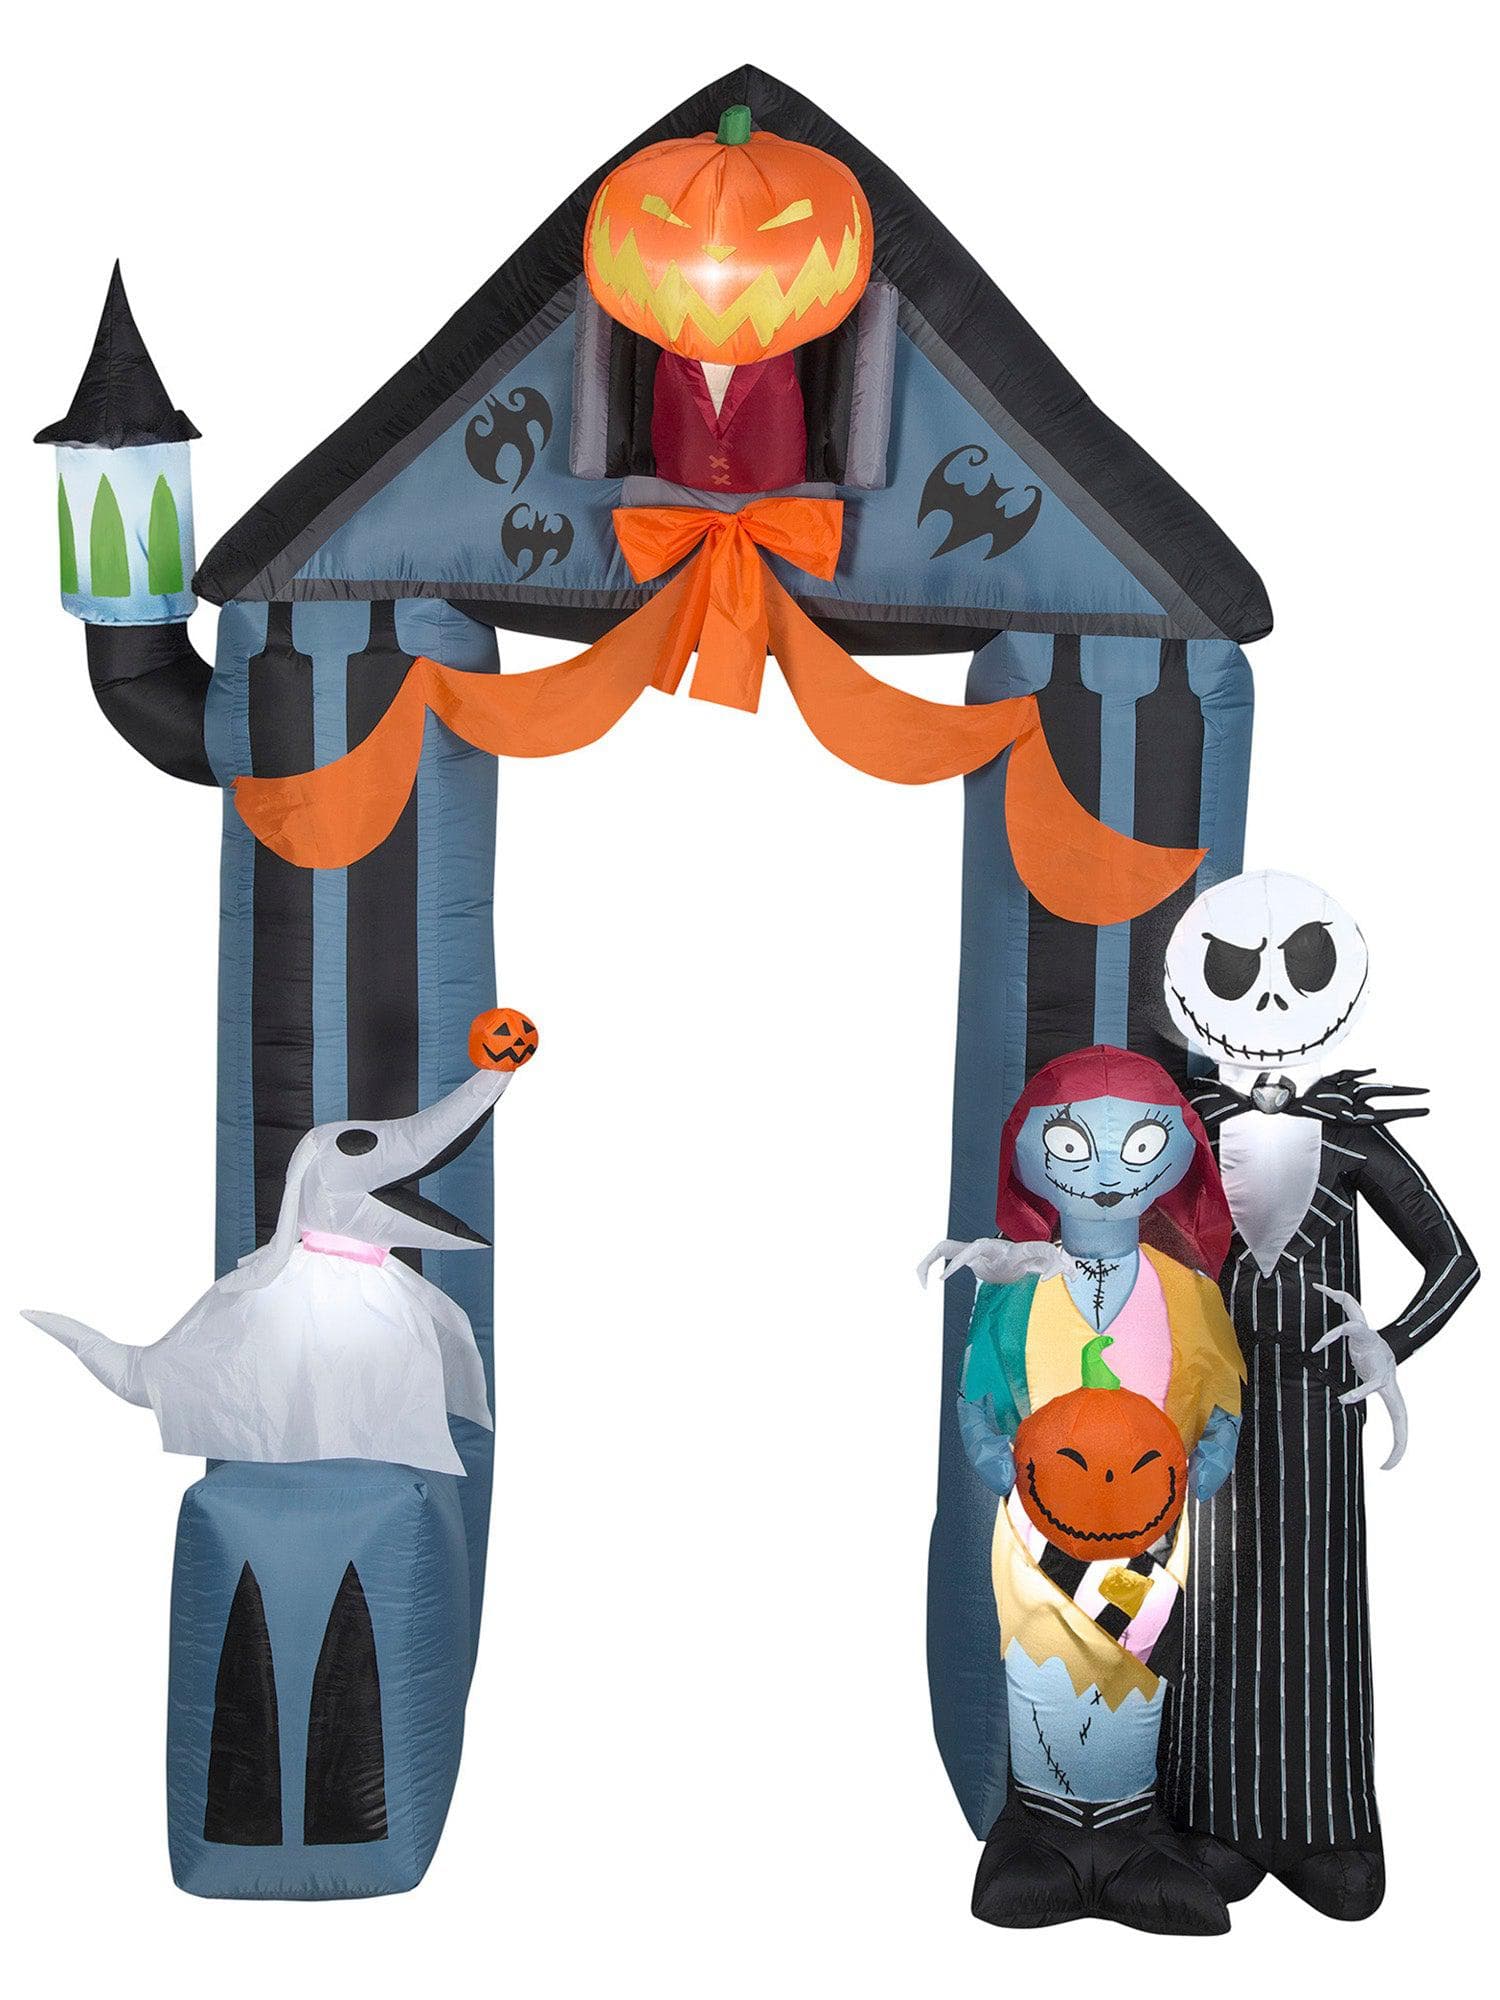 9 Foot The Nightmare Before Christmas Archway Light Up Halloween Inflatable Lawn Decor - costumes.com